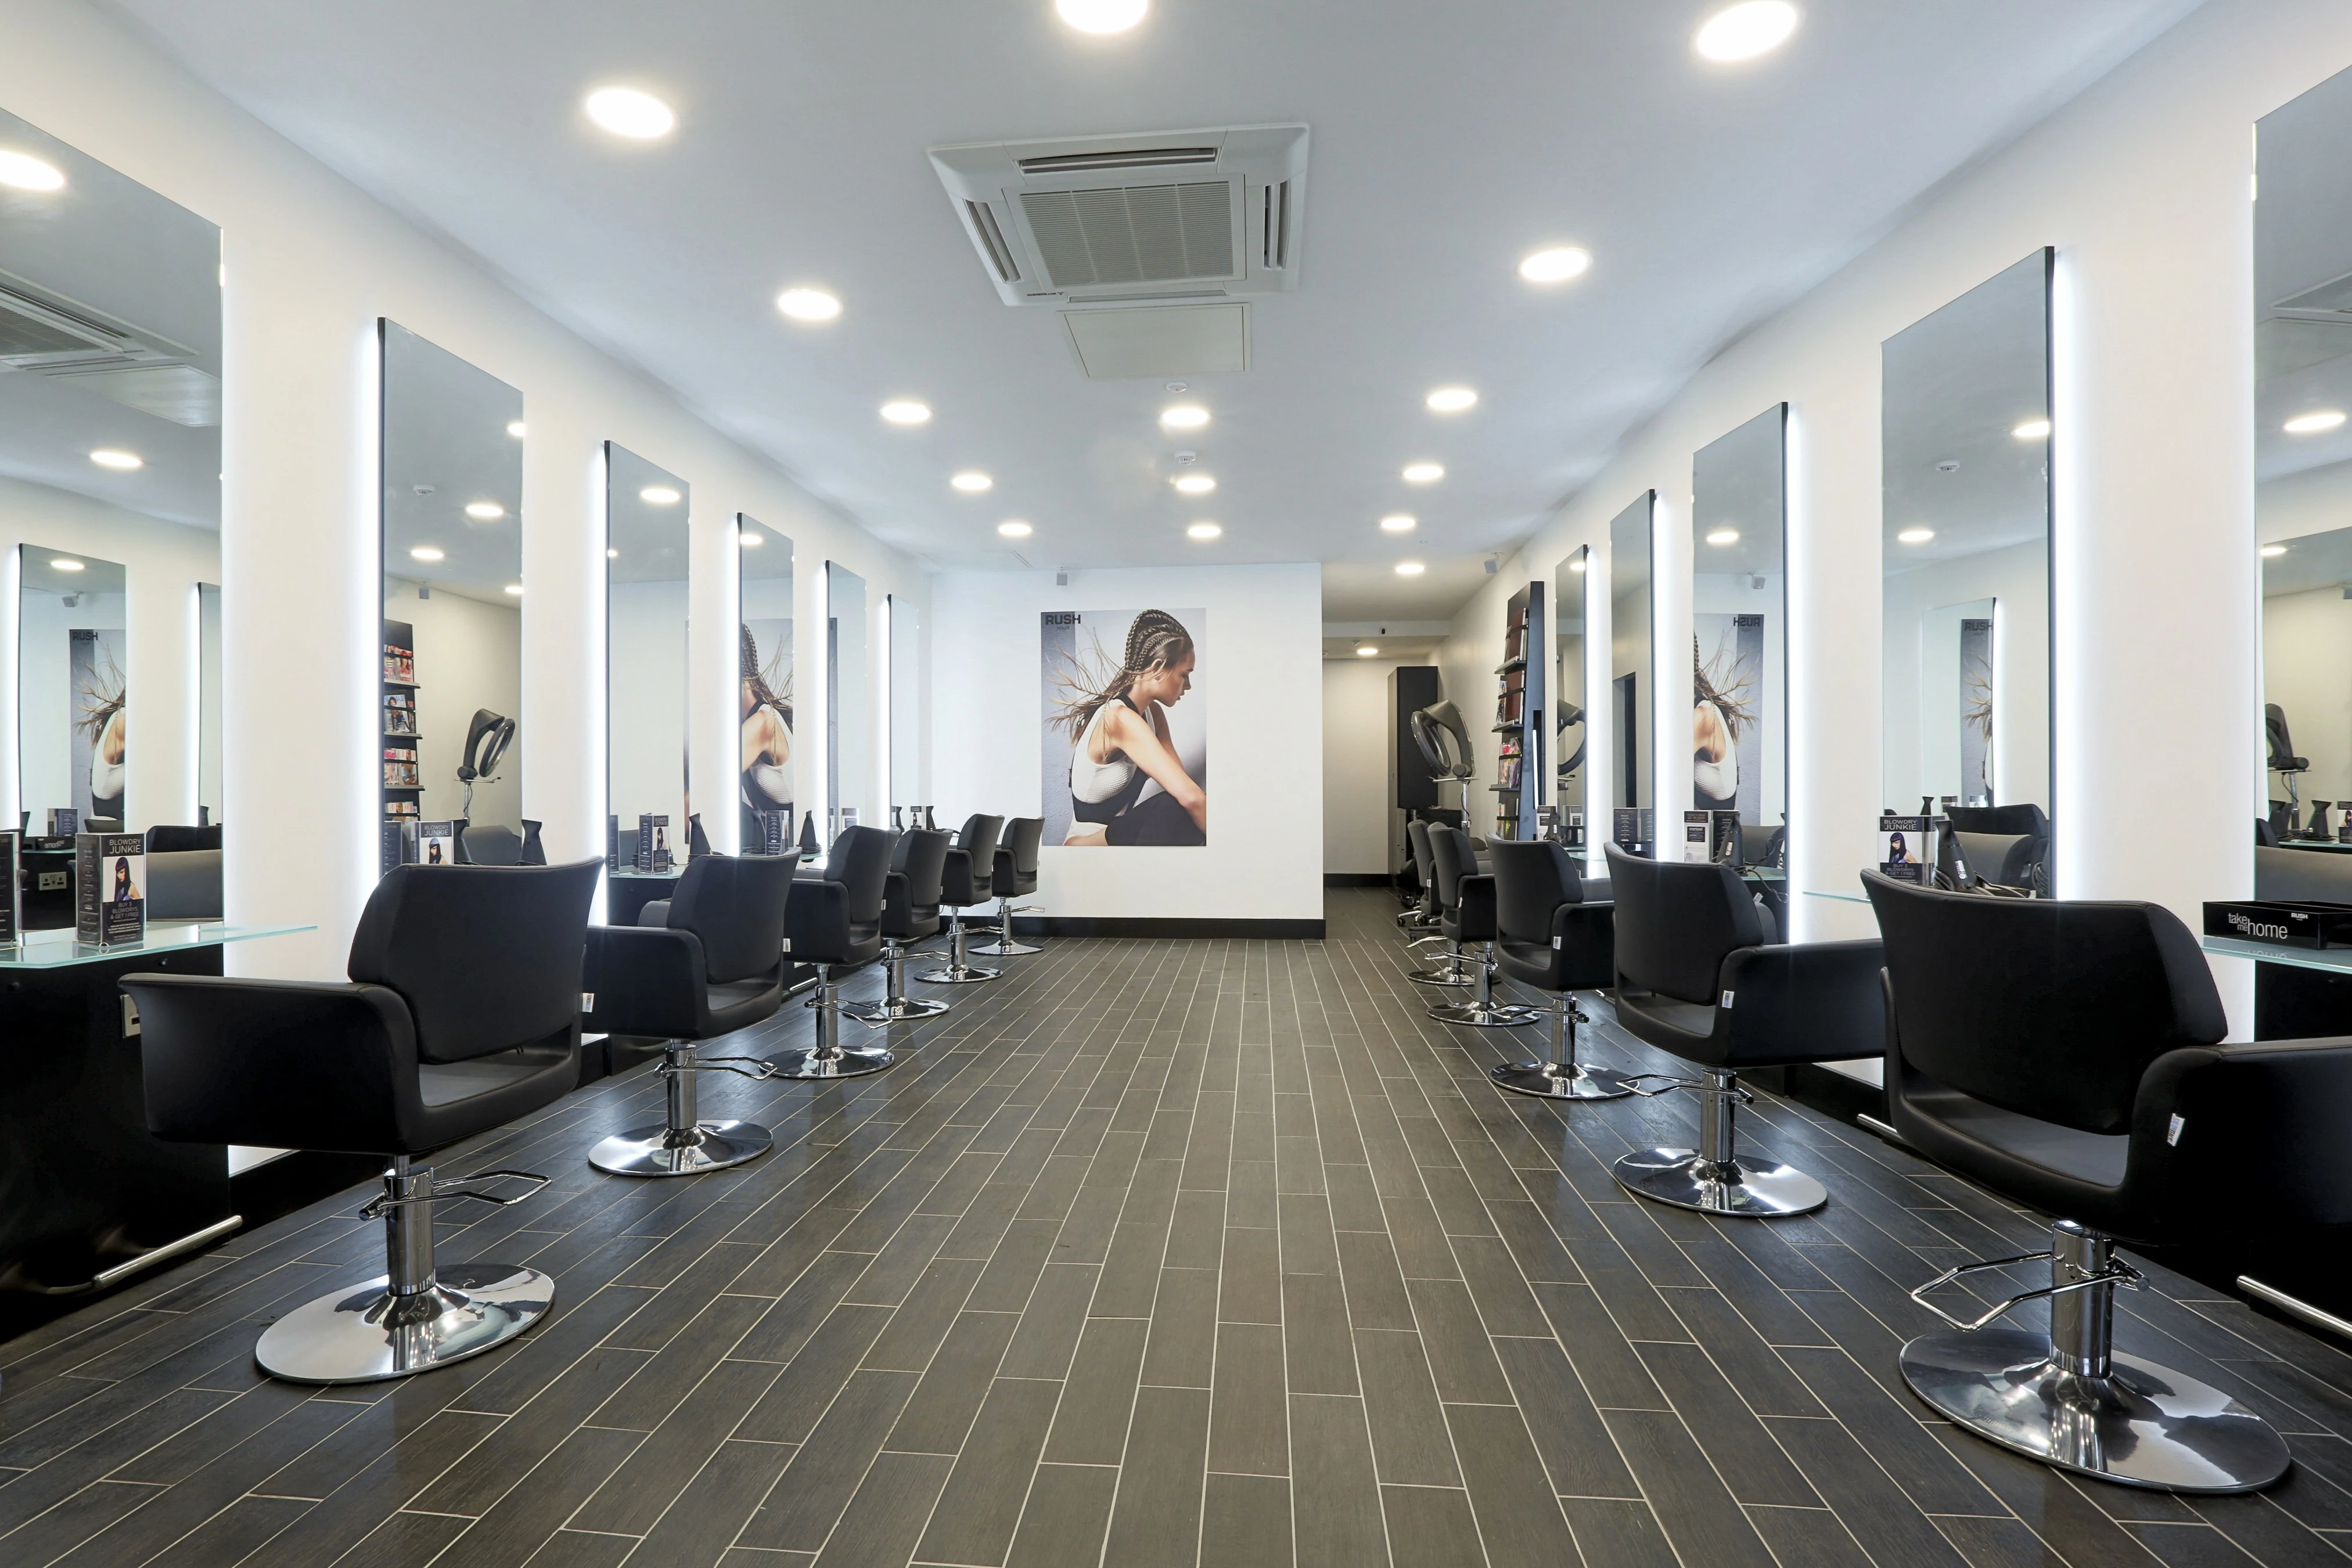 The new Shepherd's Bush salon will take after the luxe finish of the Crystal Palace salon.